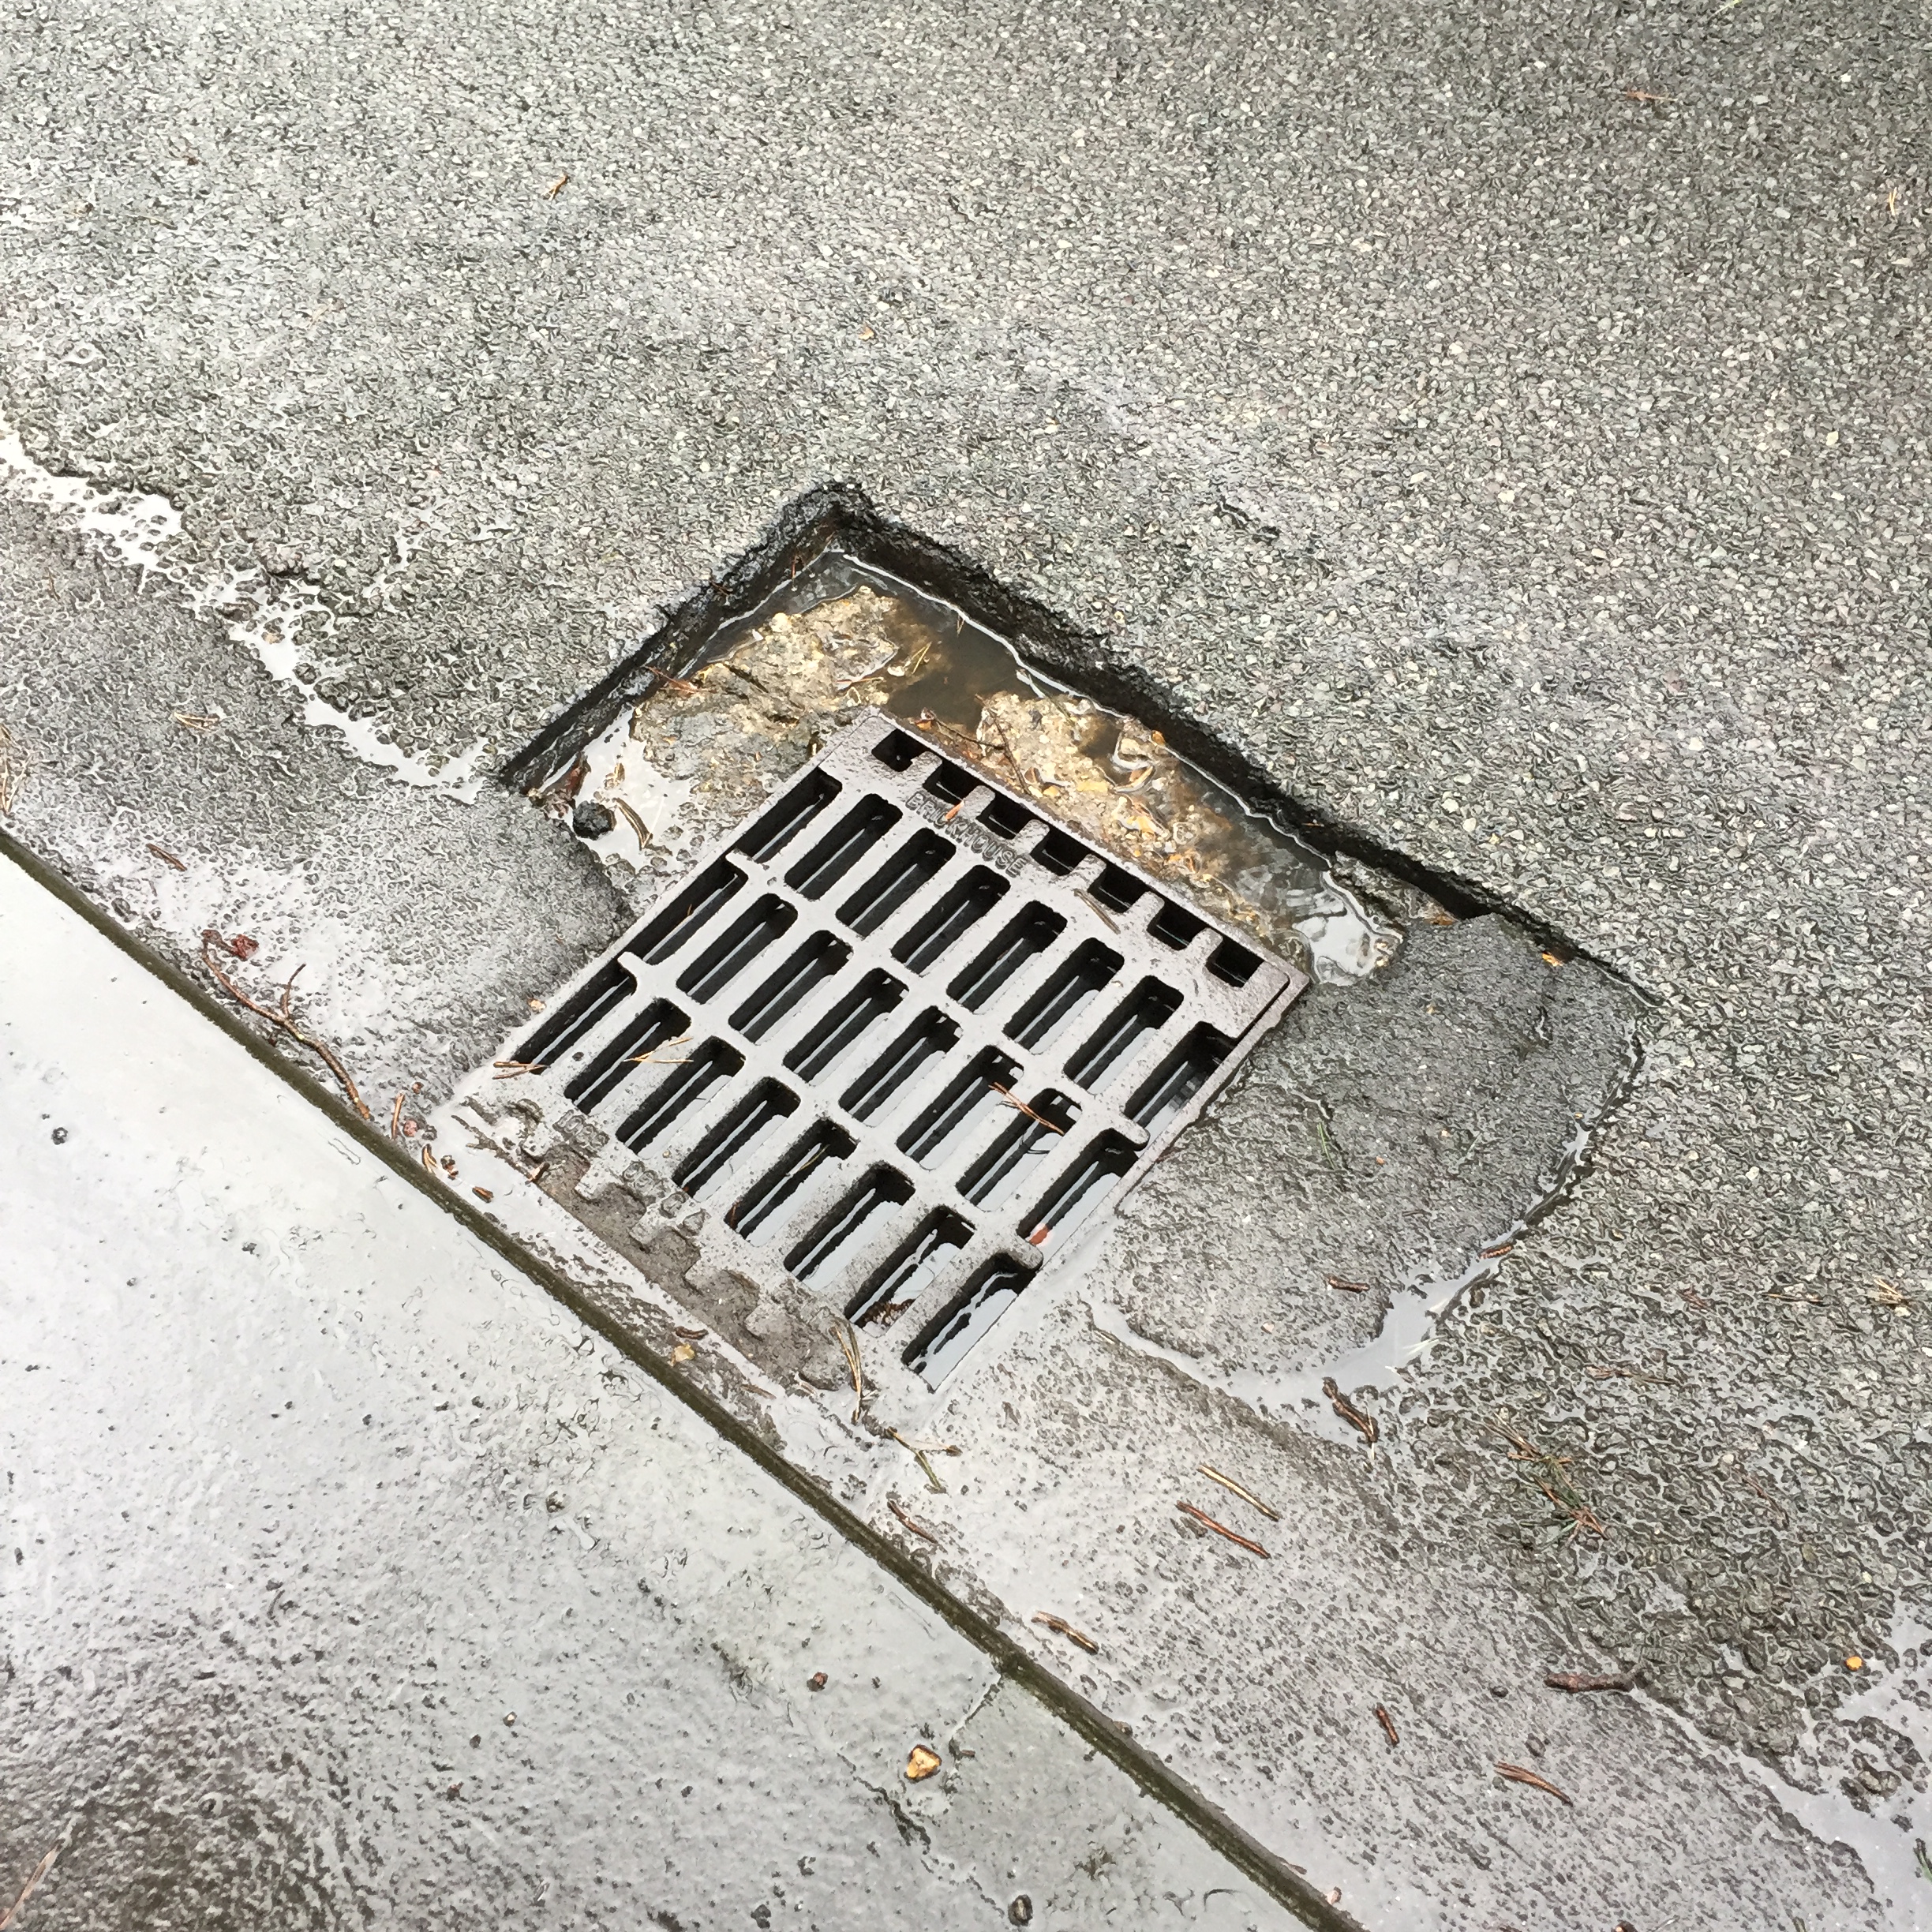 A gully grating with failure of the infill material, allowing a pothole to form